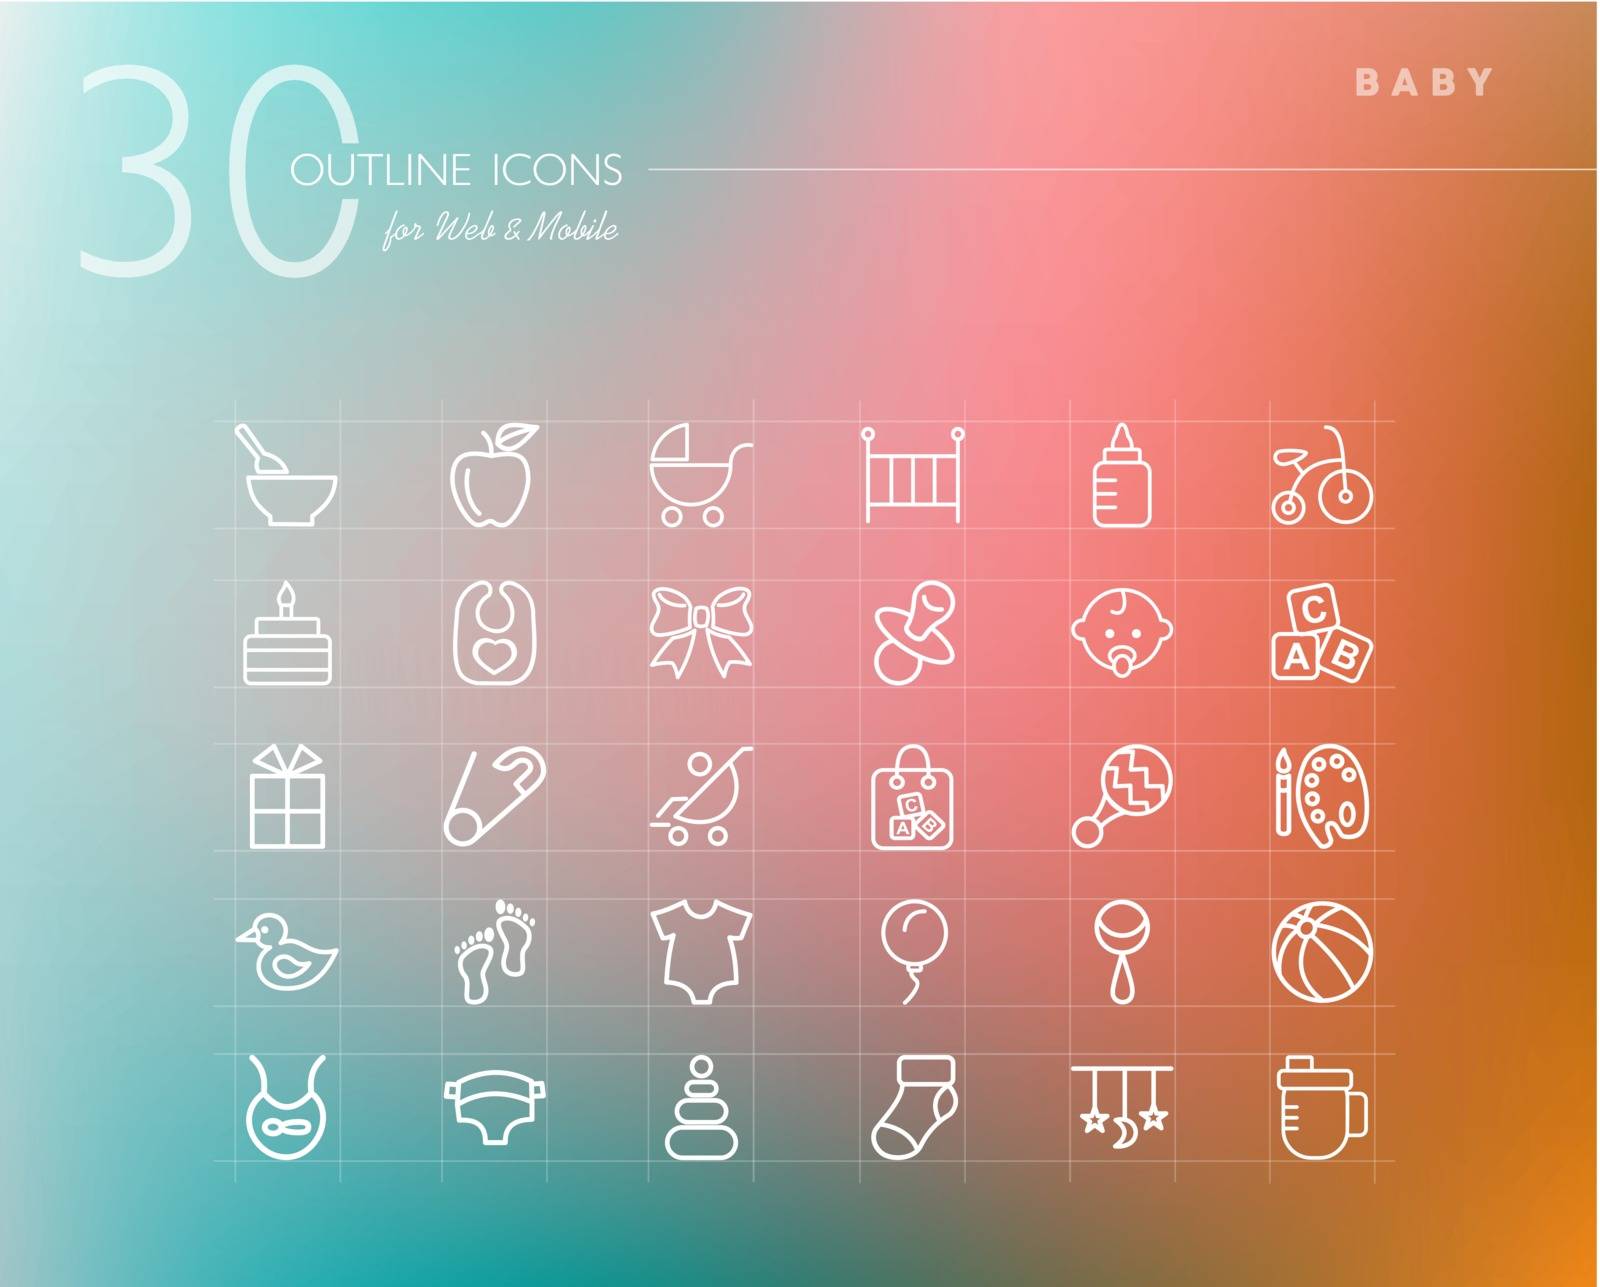 Baby outline icons set  by cienpies